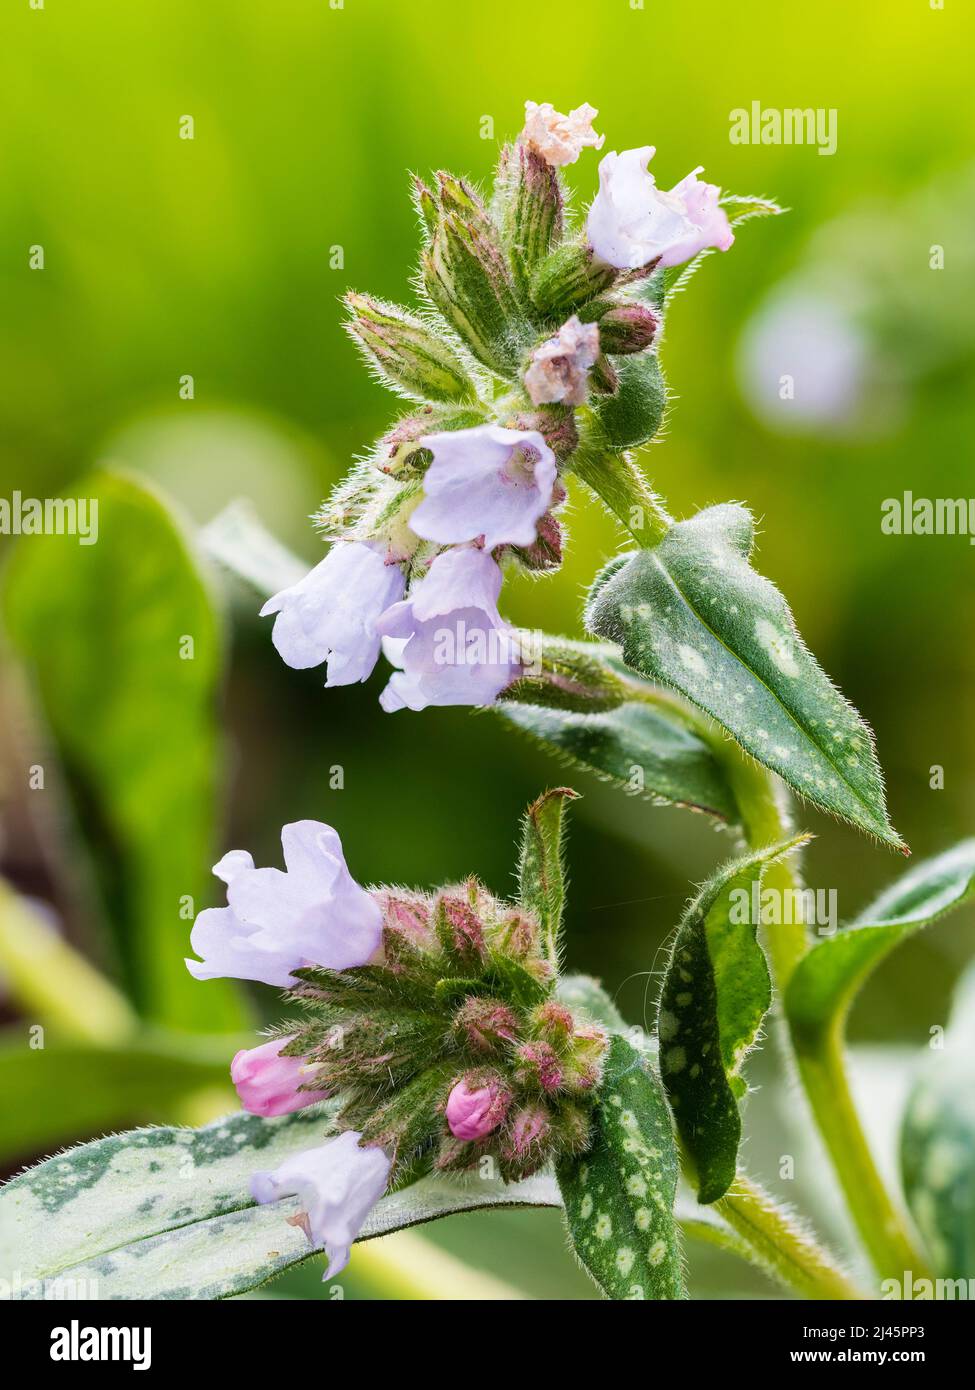 Pale blue flowers and silver spotted leaves of the early spring flowering hardy lungwort, Pulmonaria saccharata 'Opal' Stock Photo